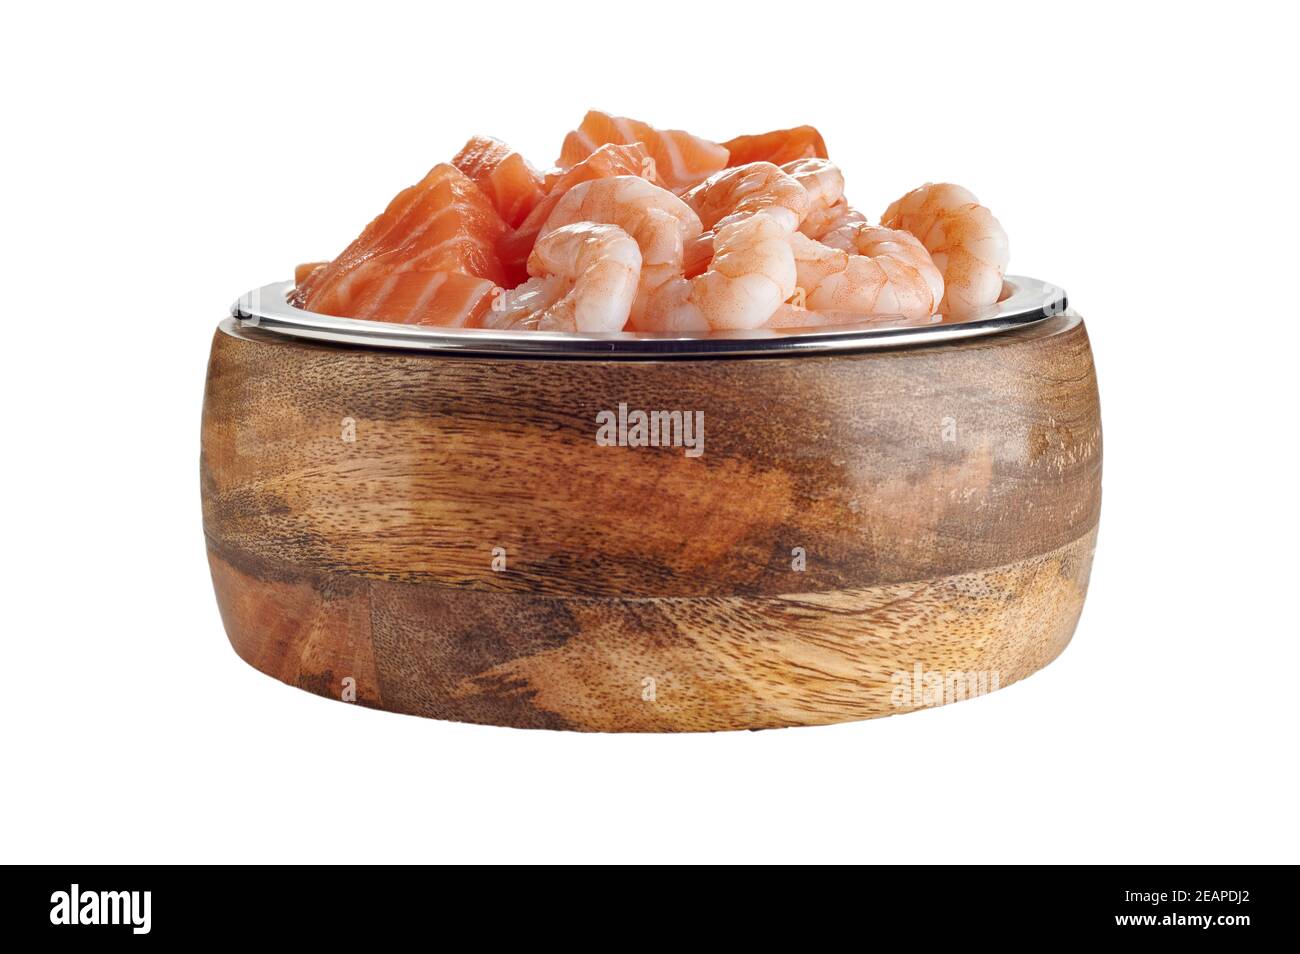 Fresh gourmet seafood pet food for your cat with diced raw salmon and boiled shrimp tails served in a wood and metal bowl in a side view on white in a Stock Photo